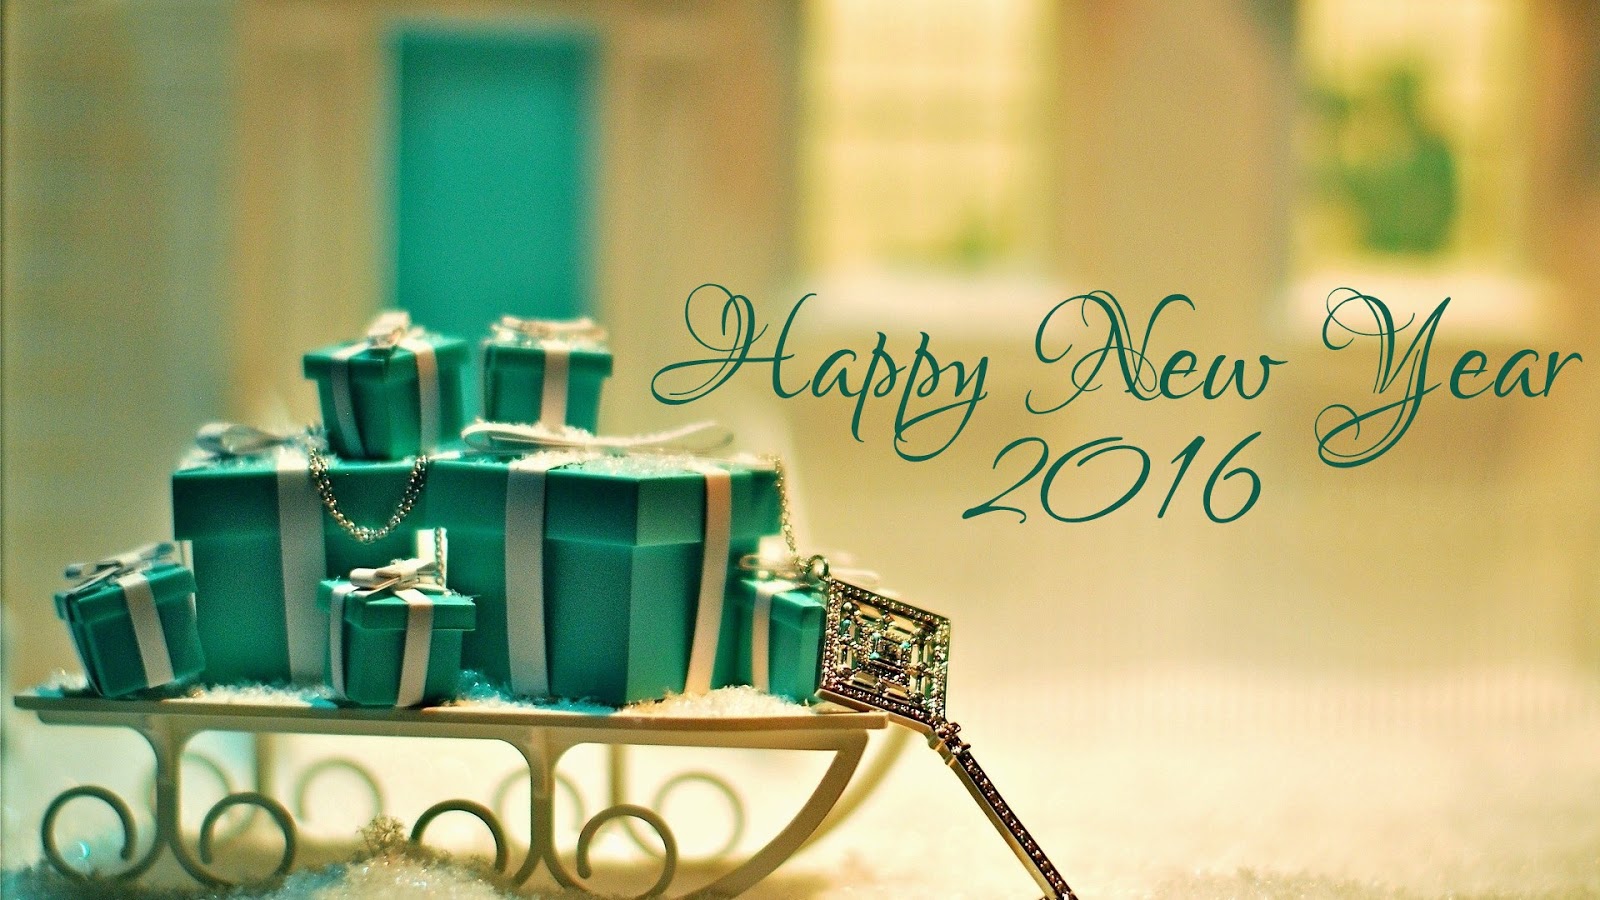 Happy New Year 2016 Images pictures wallpapers (23)